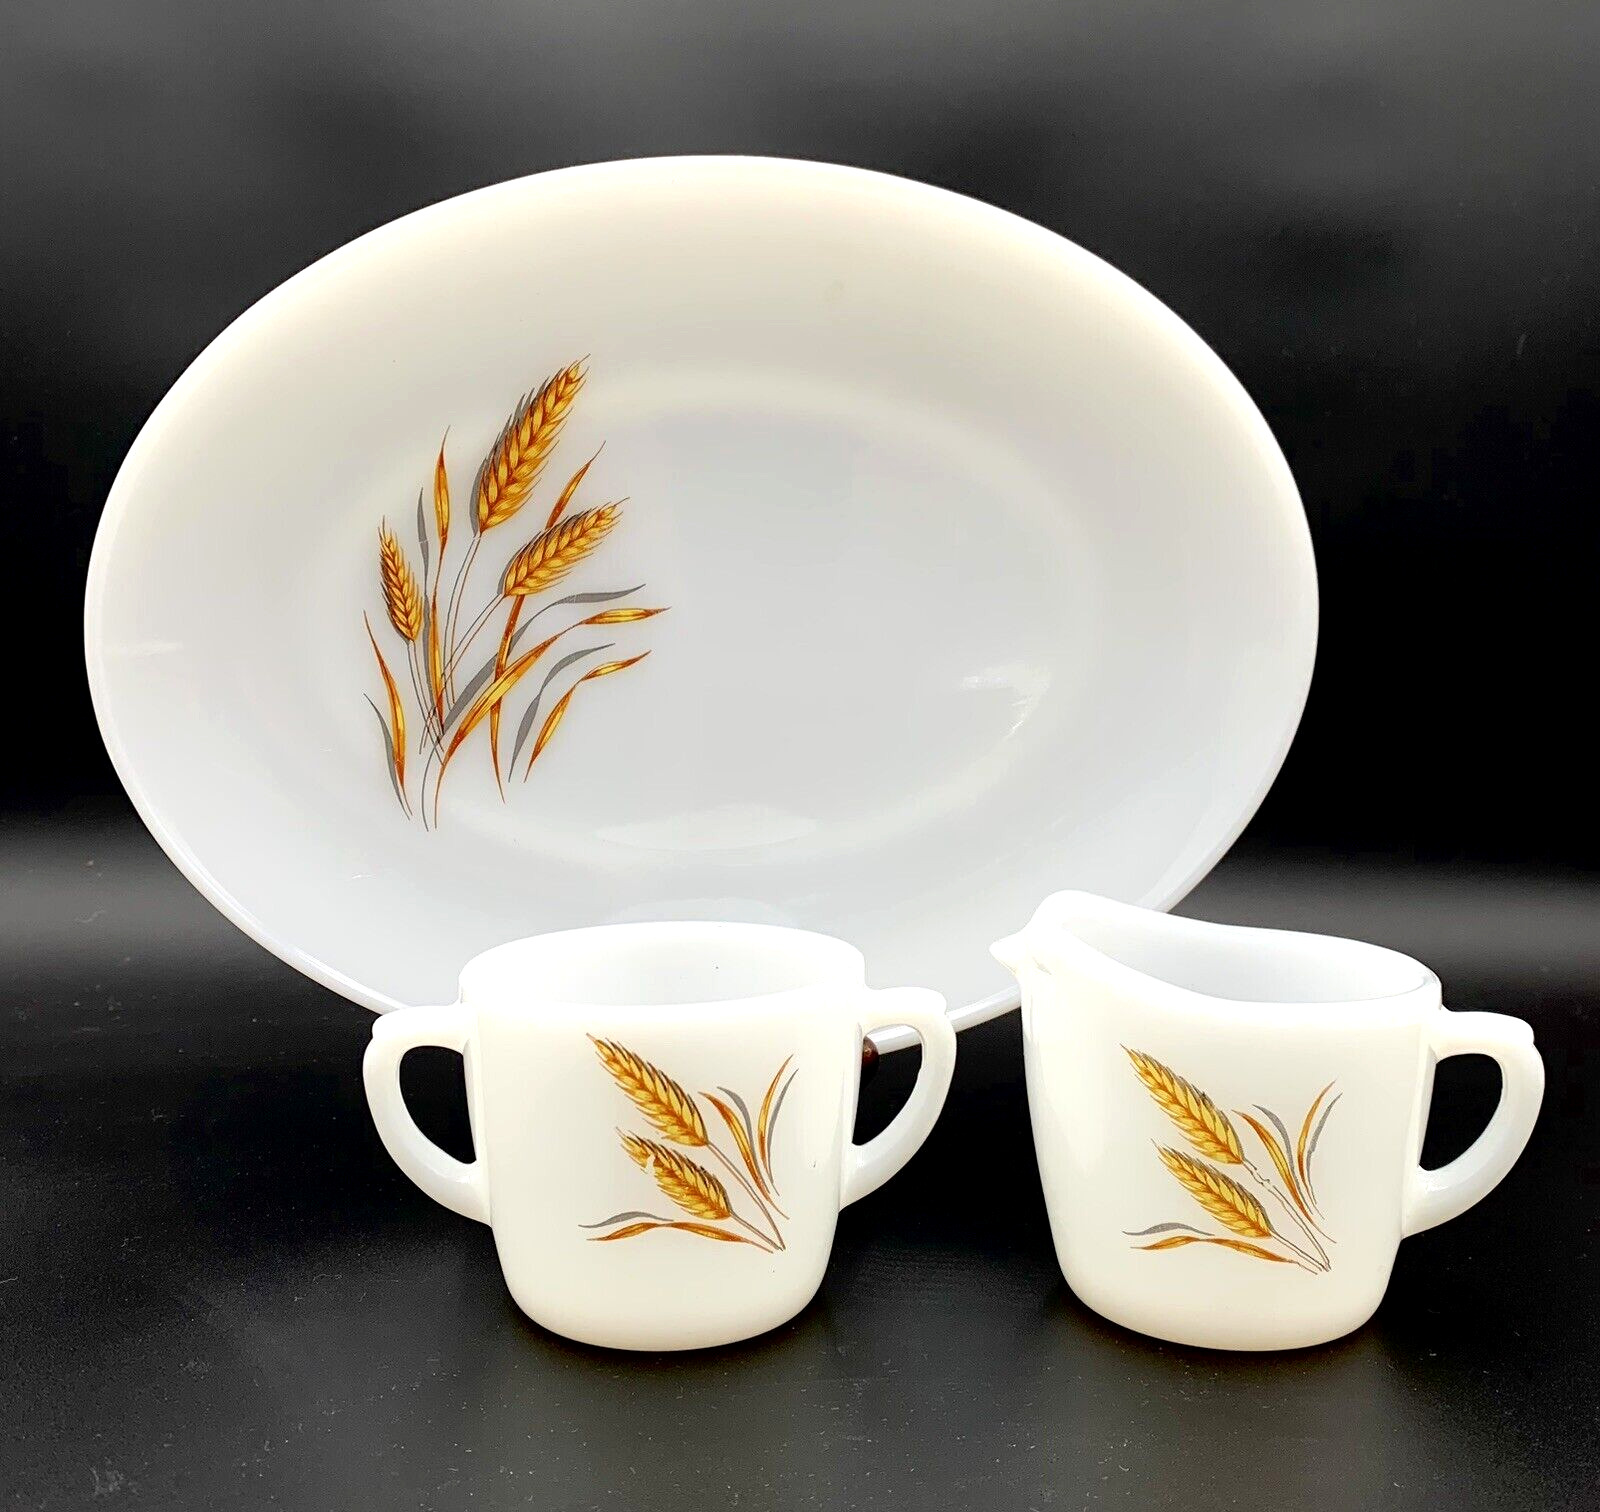 Vintage 1960s MCM Classic Fire King Golden Wheat Creamer, Sugar, and Platter Set